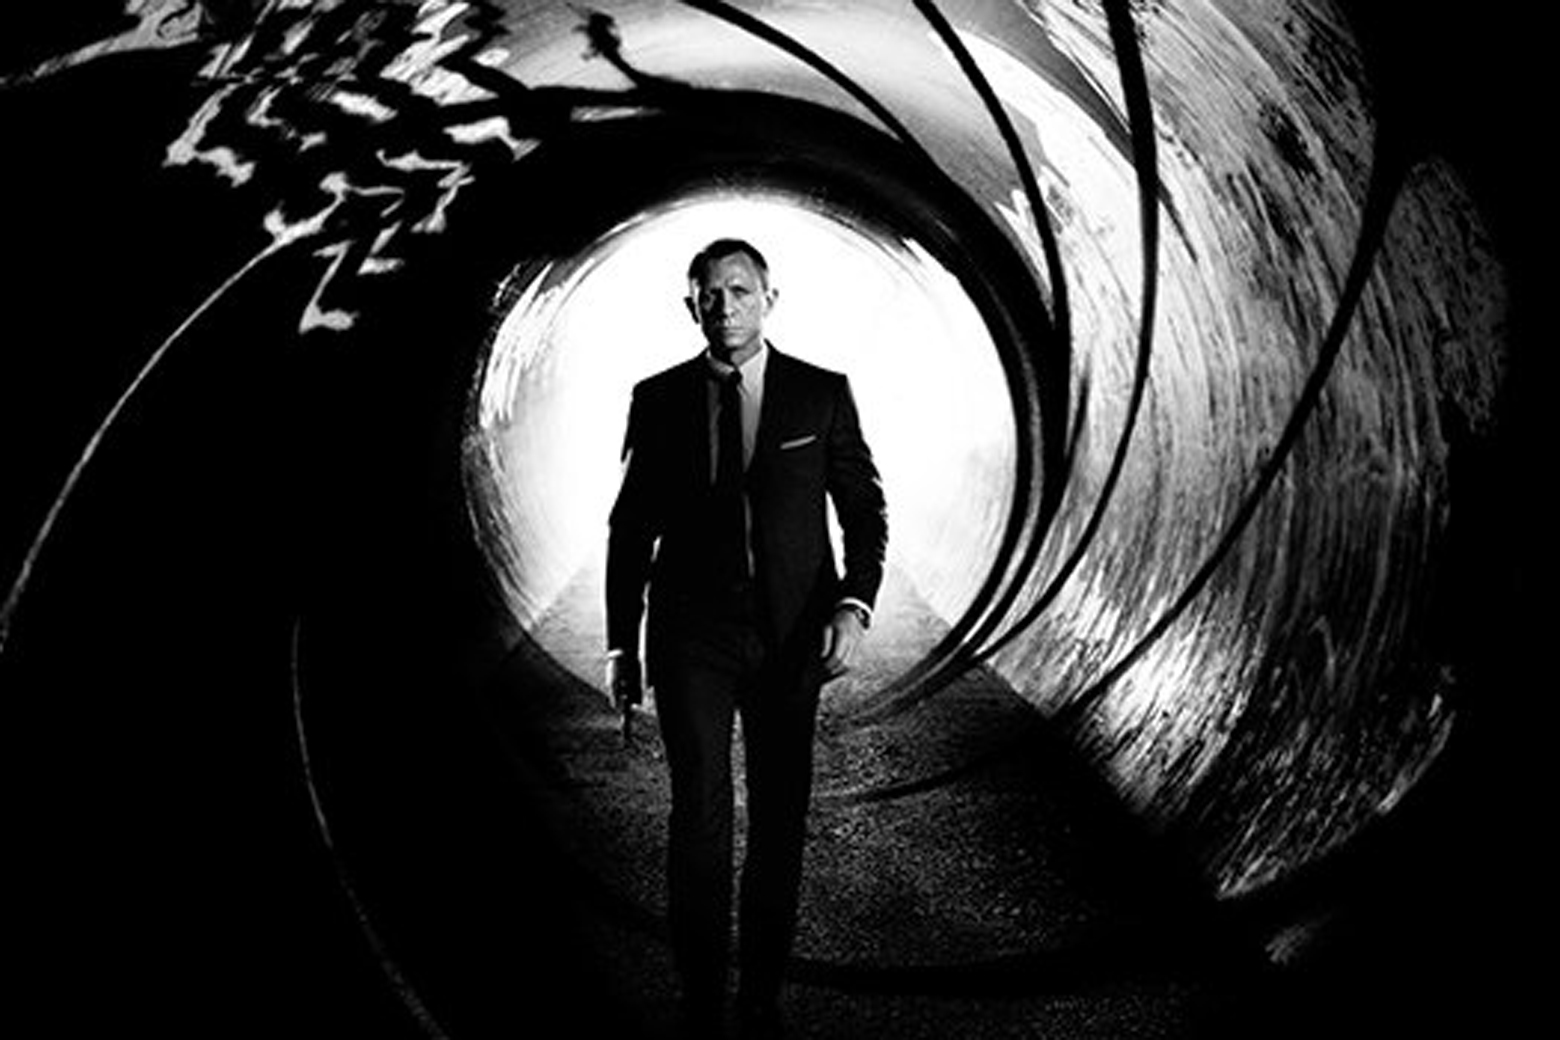 Countdown to 007 ‘Spectre’: Ranking the Best of Bond